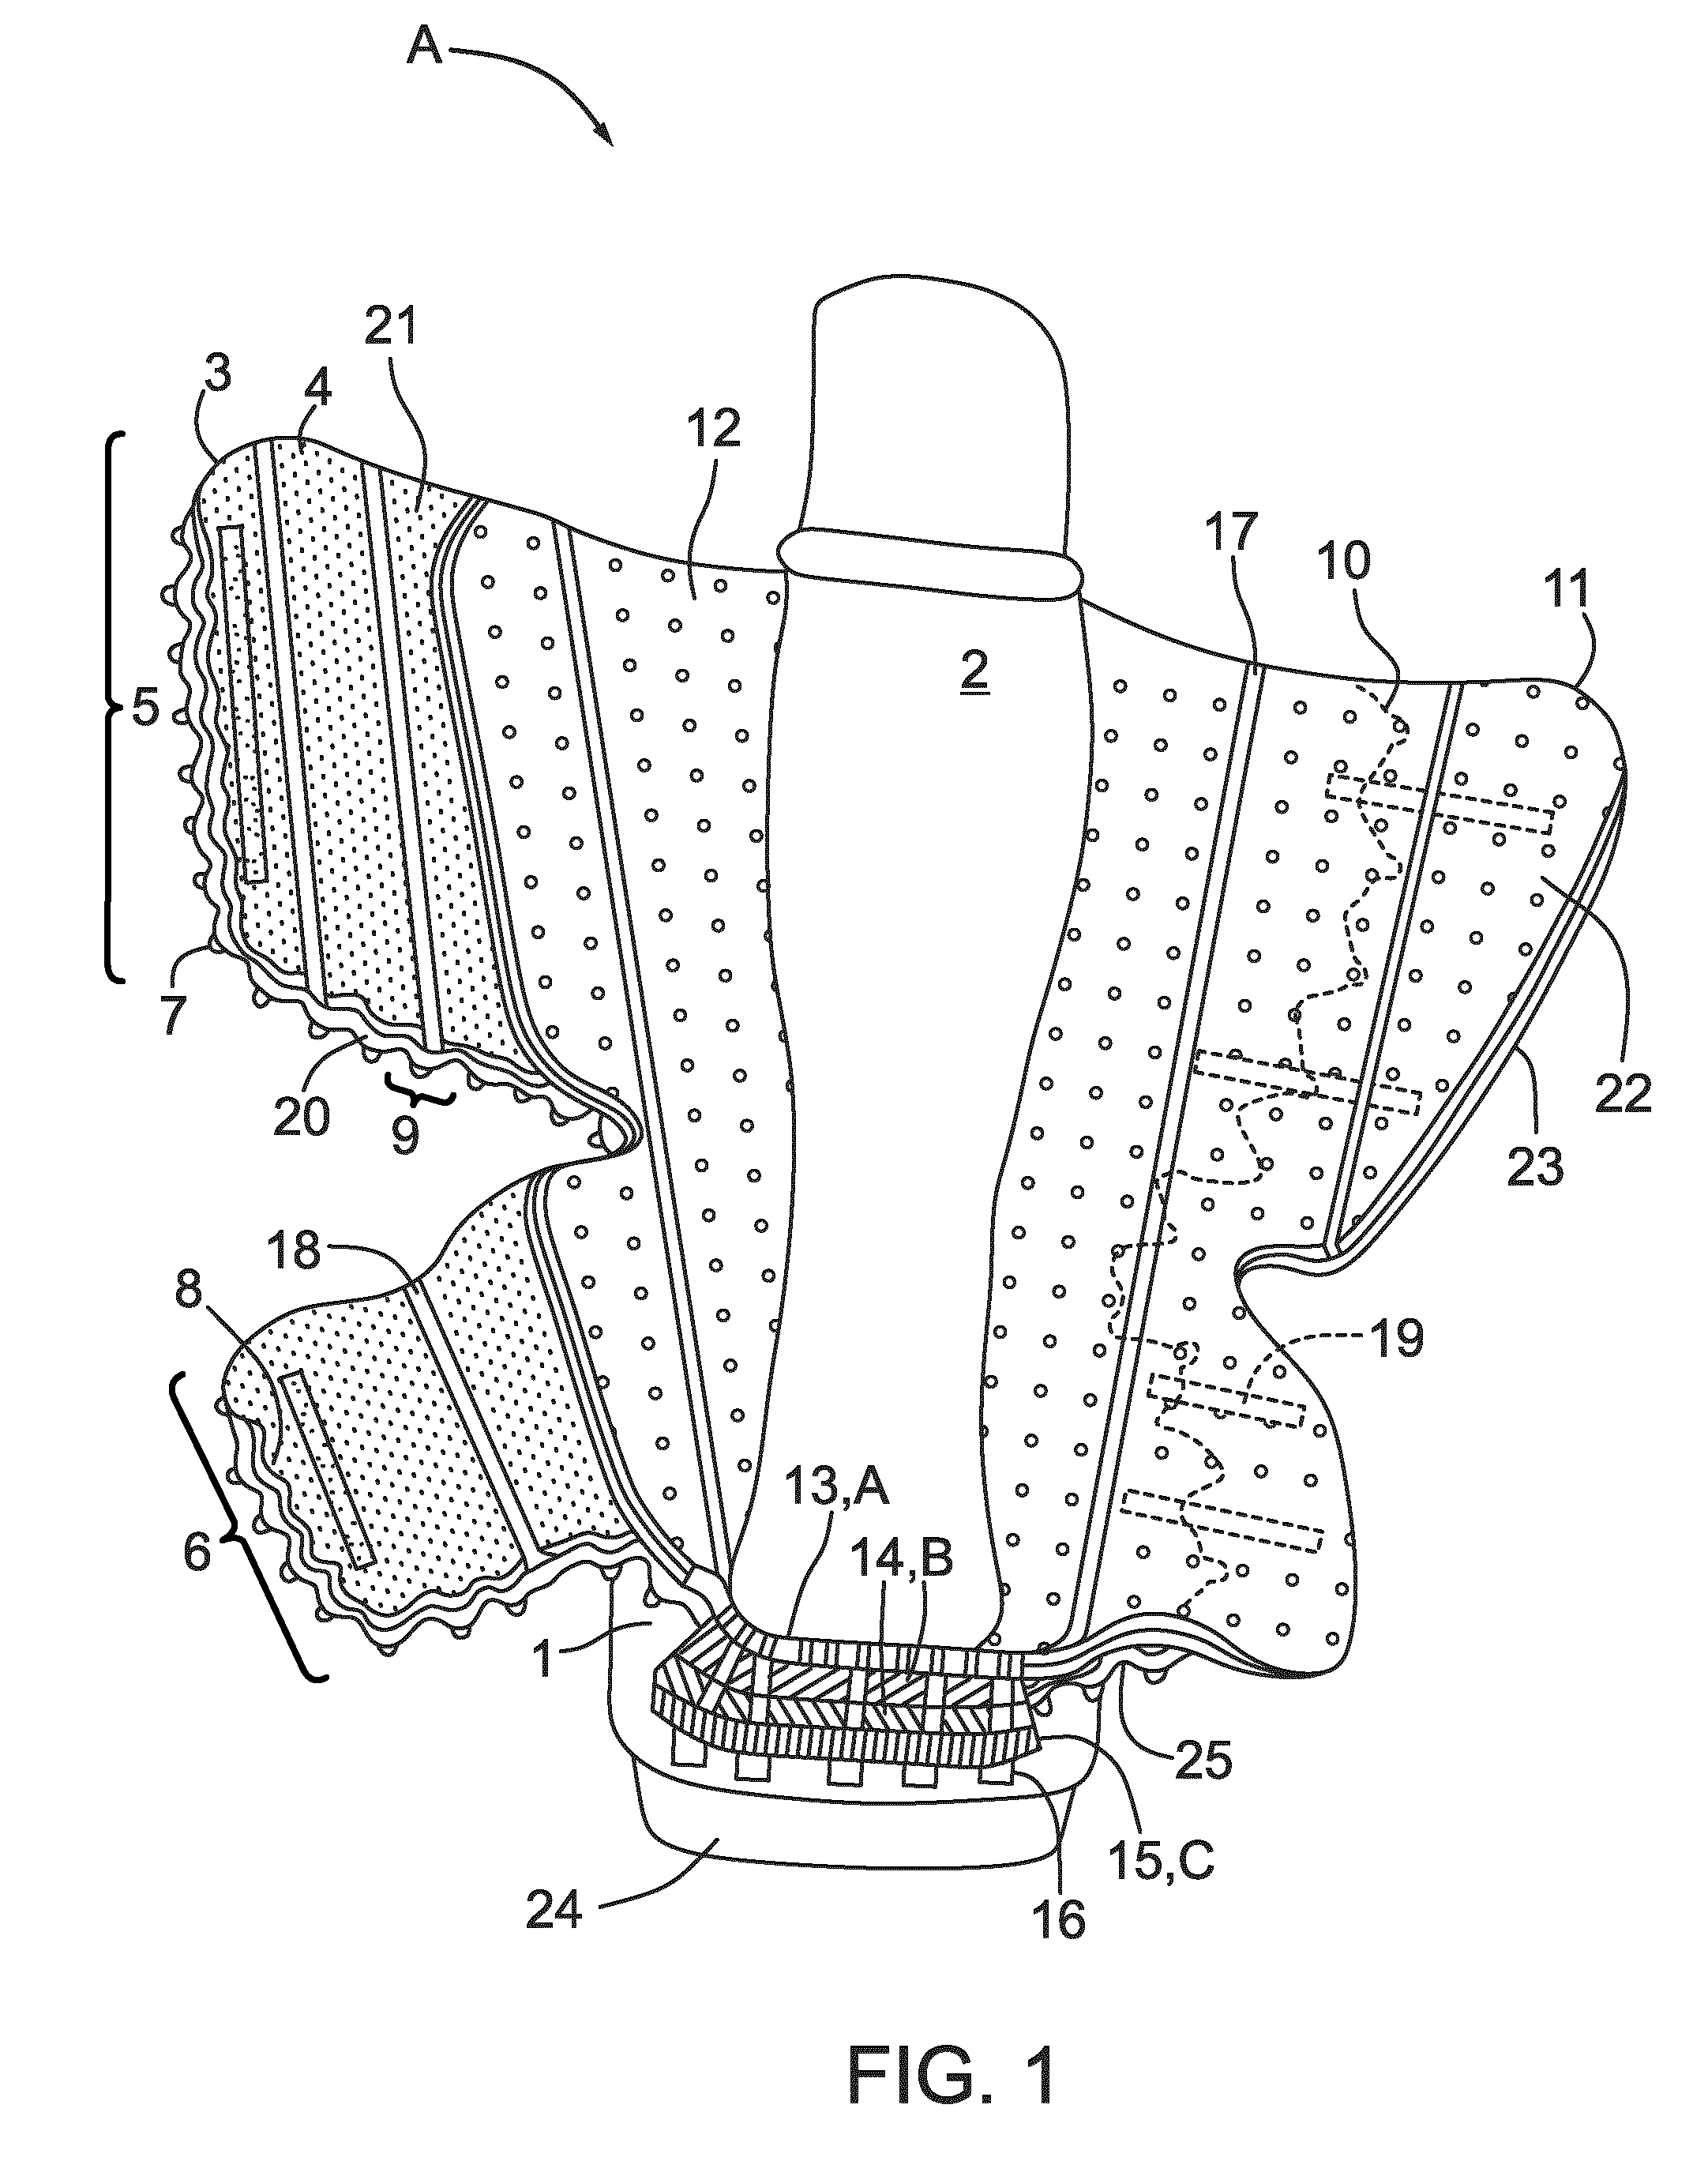 Porous orthopedic or prosthetic support having removable cushioning and scaffolding layers